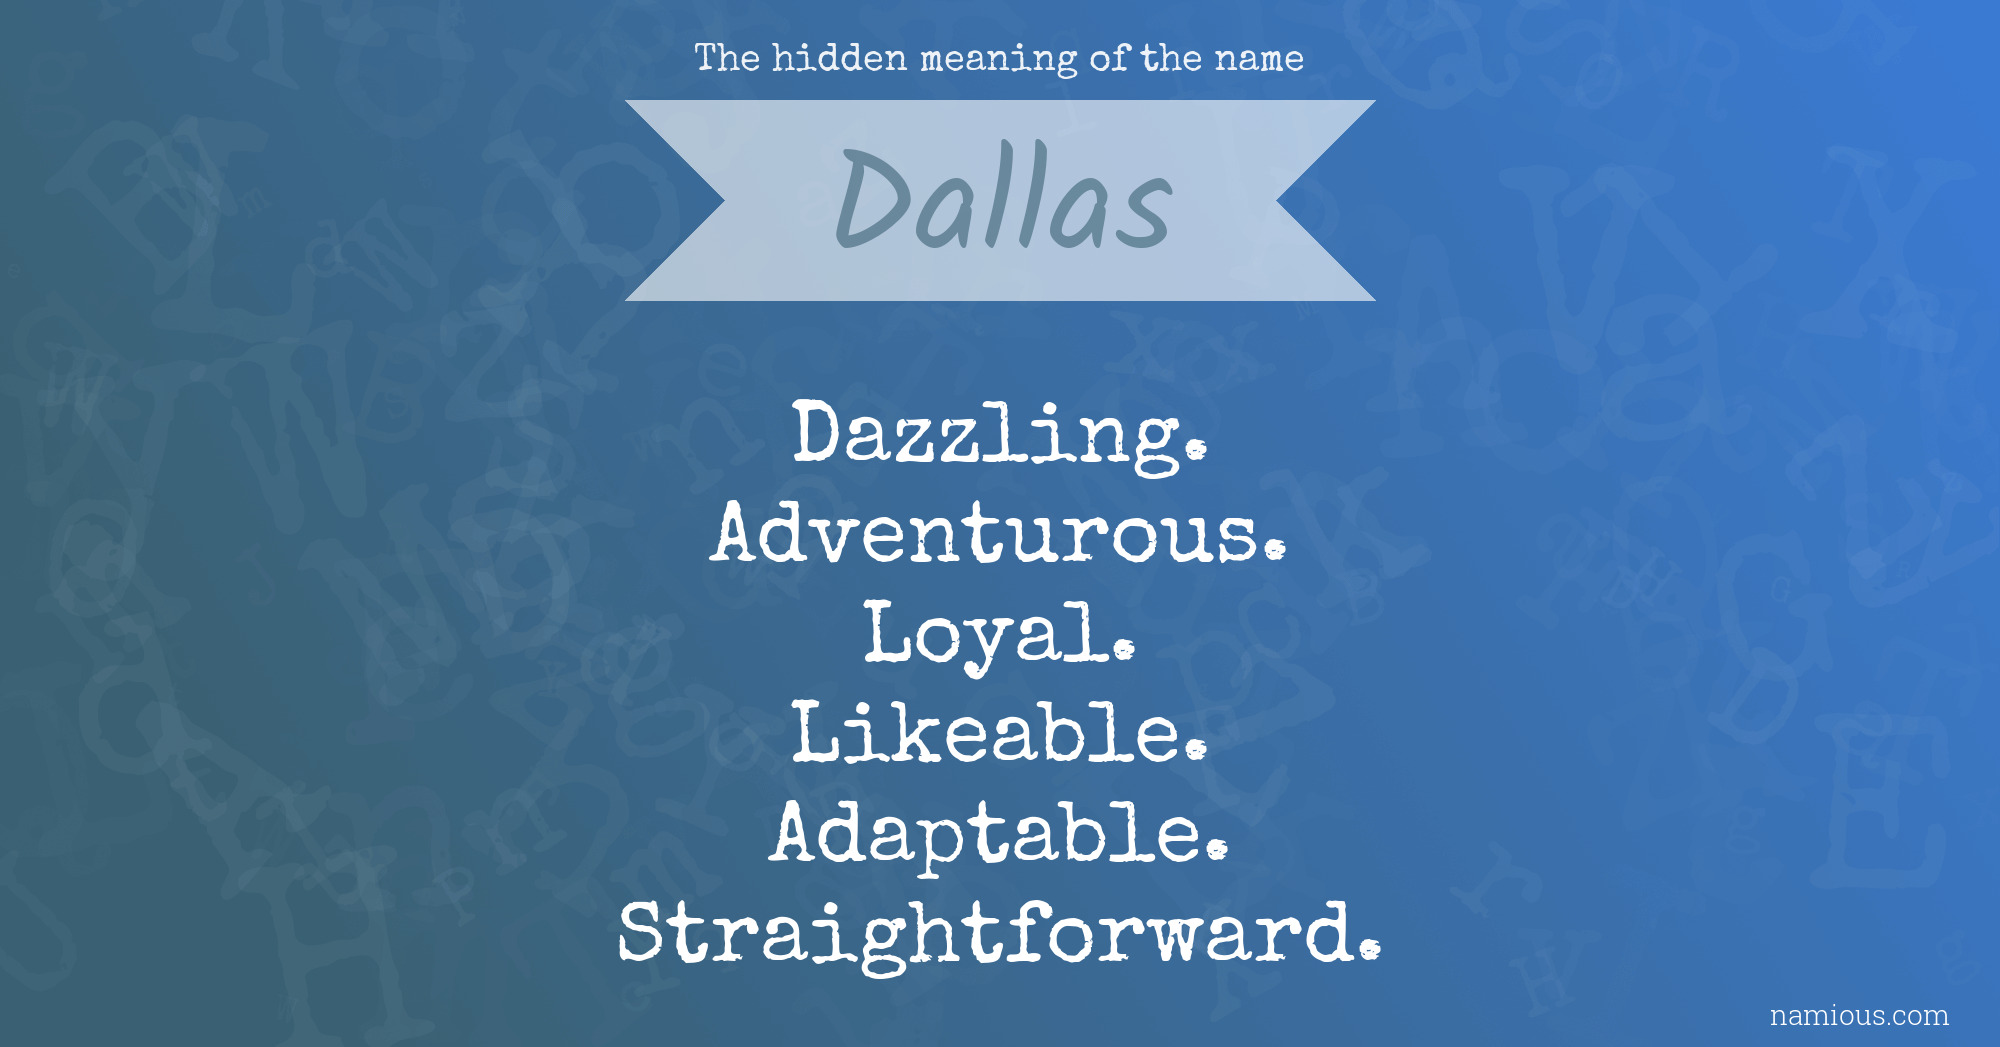 The hidden meaning of the name Dallas